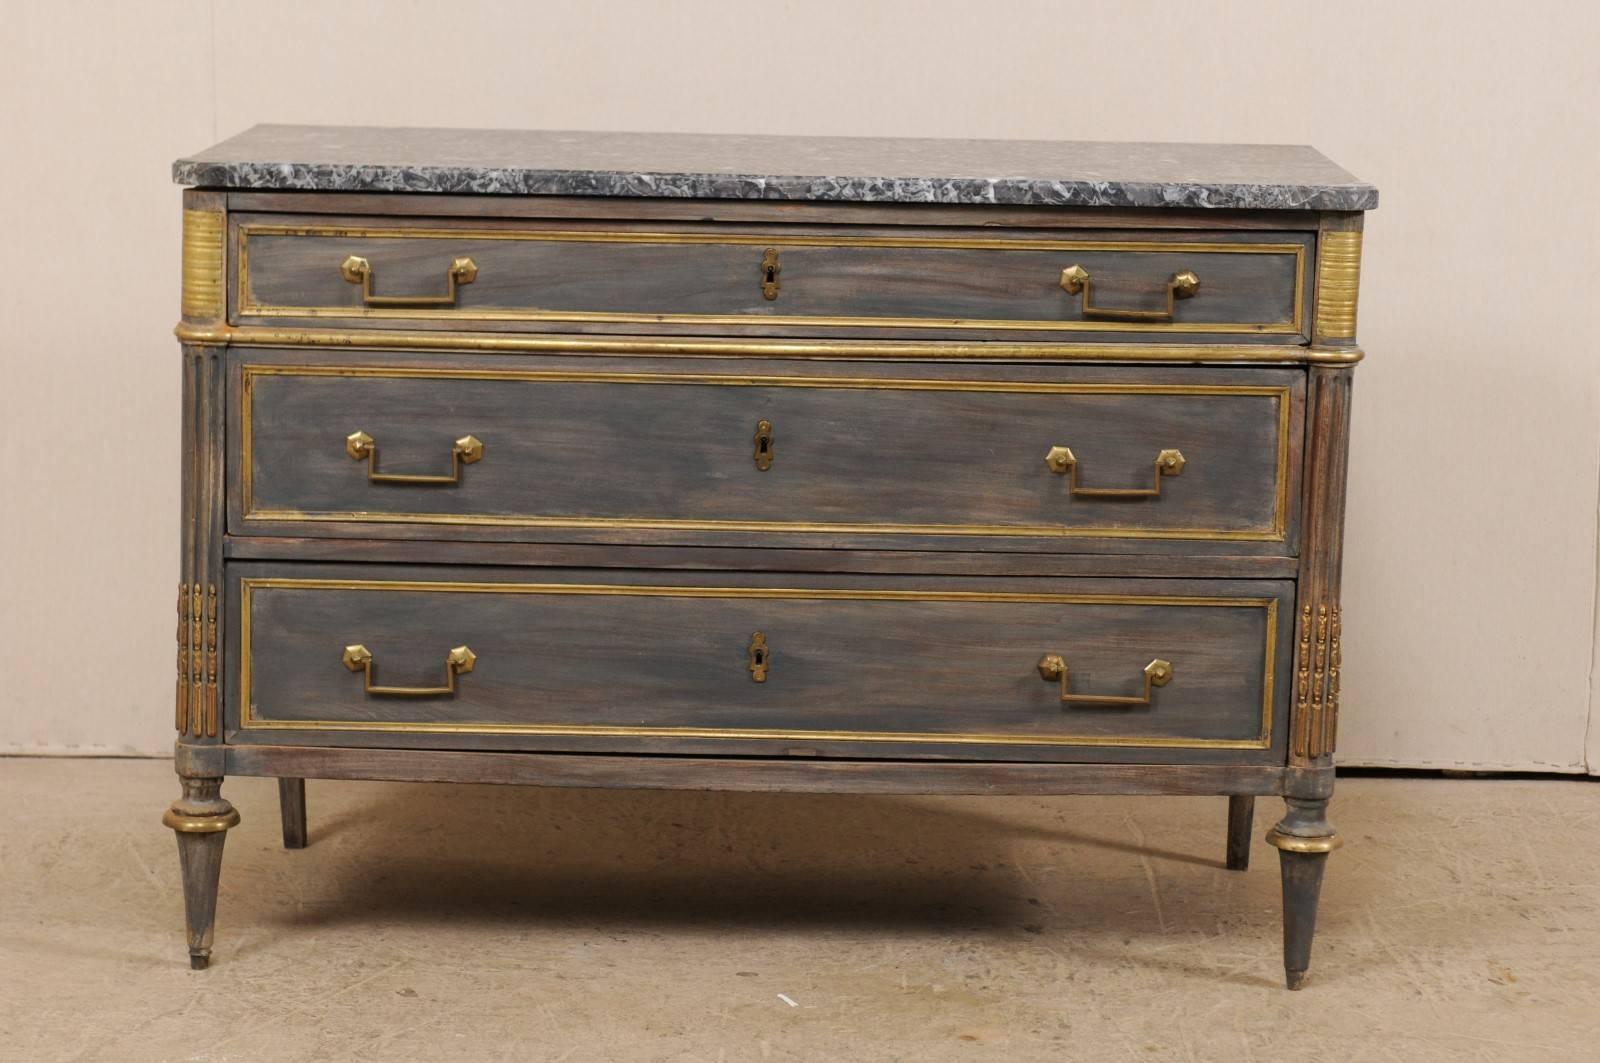 A French 19th century wood carved chest of drawers with marble top. This exquisite French antique chest features a marble top with rounded, cove-edges at both front corners, atop a neoclassical case with rounded side posts which are fluted and